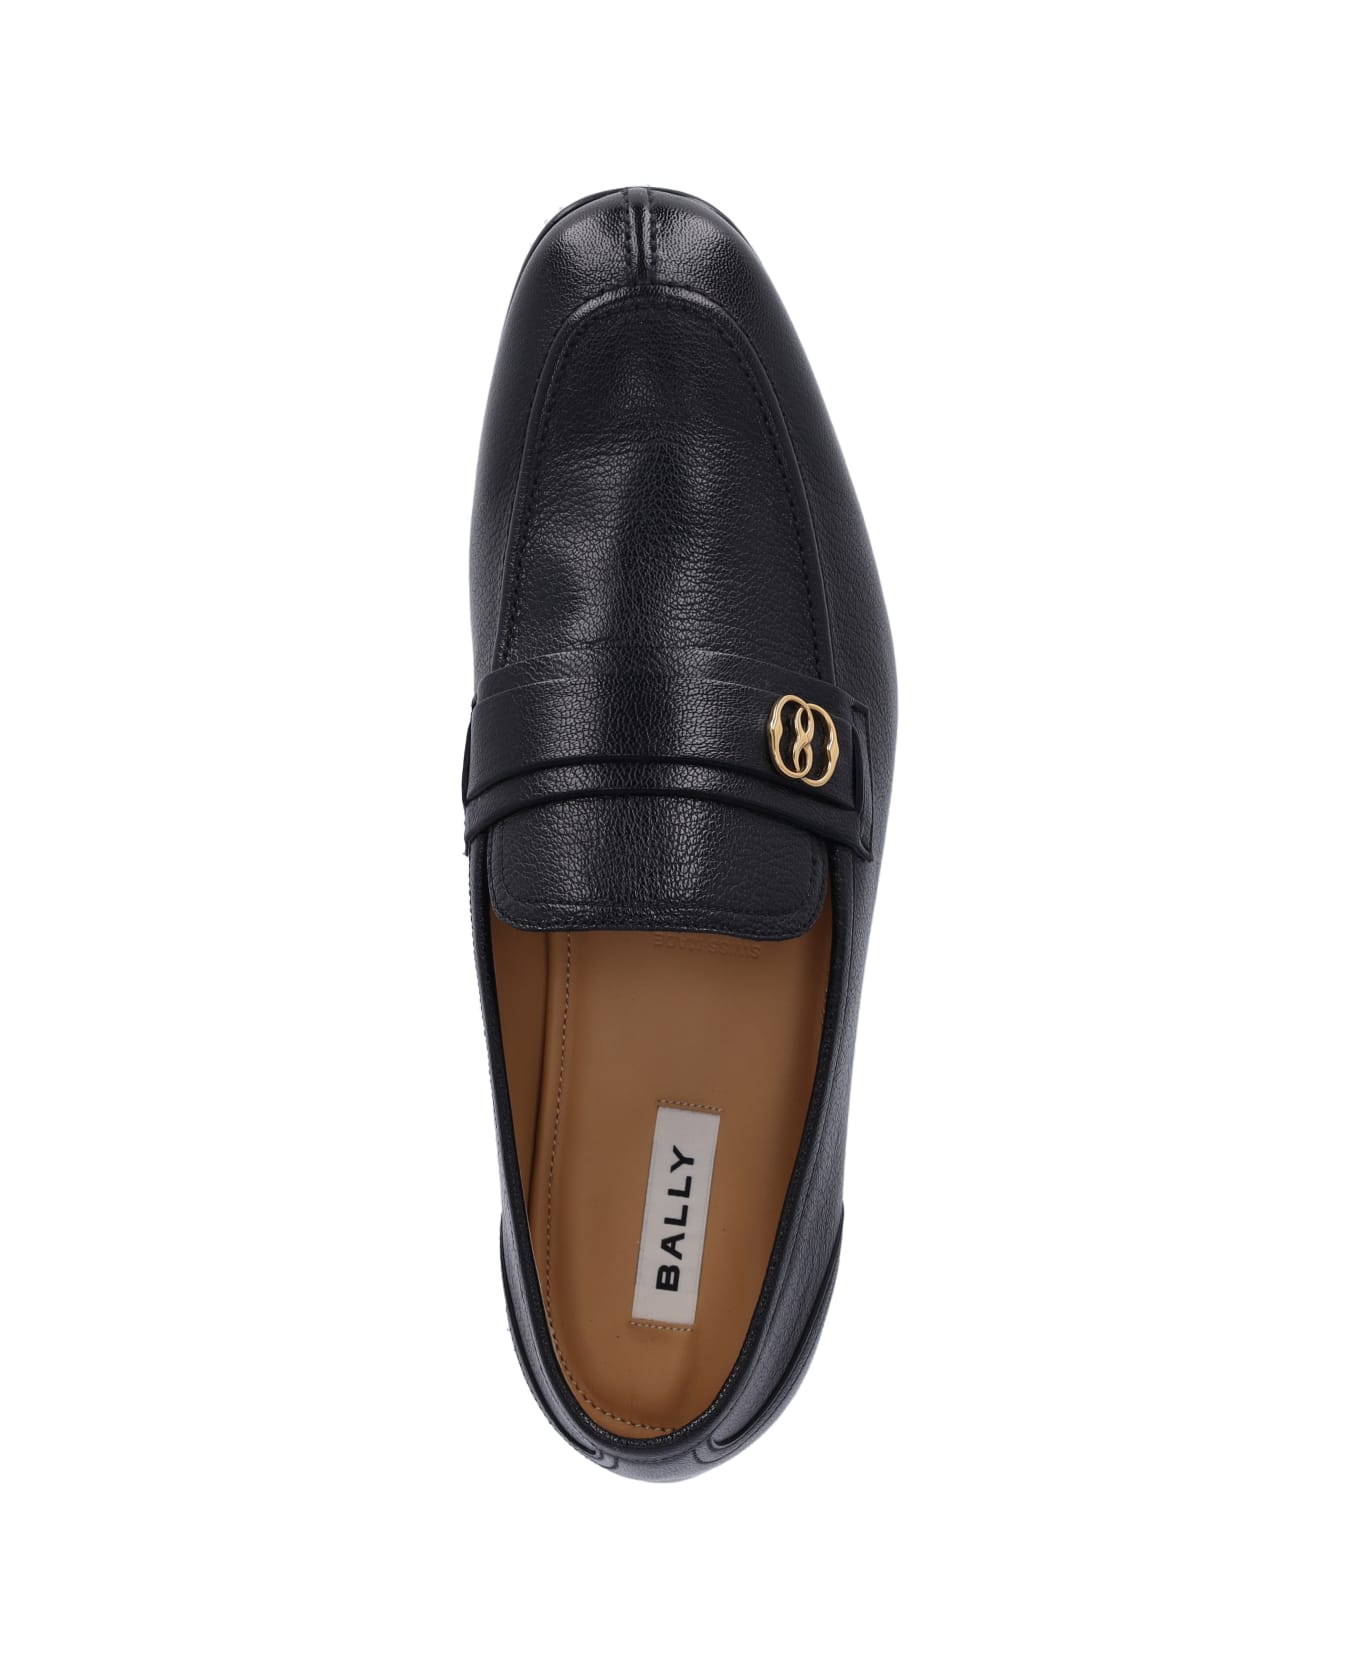 Bally 'suisse' Loafers - Black   ローファー＆デッキシューズ